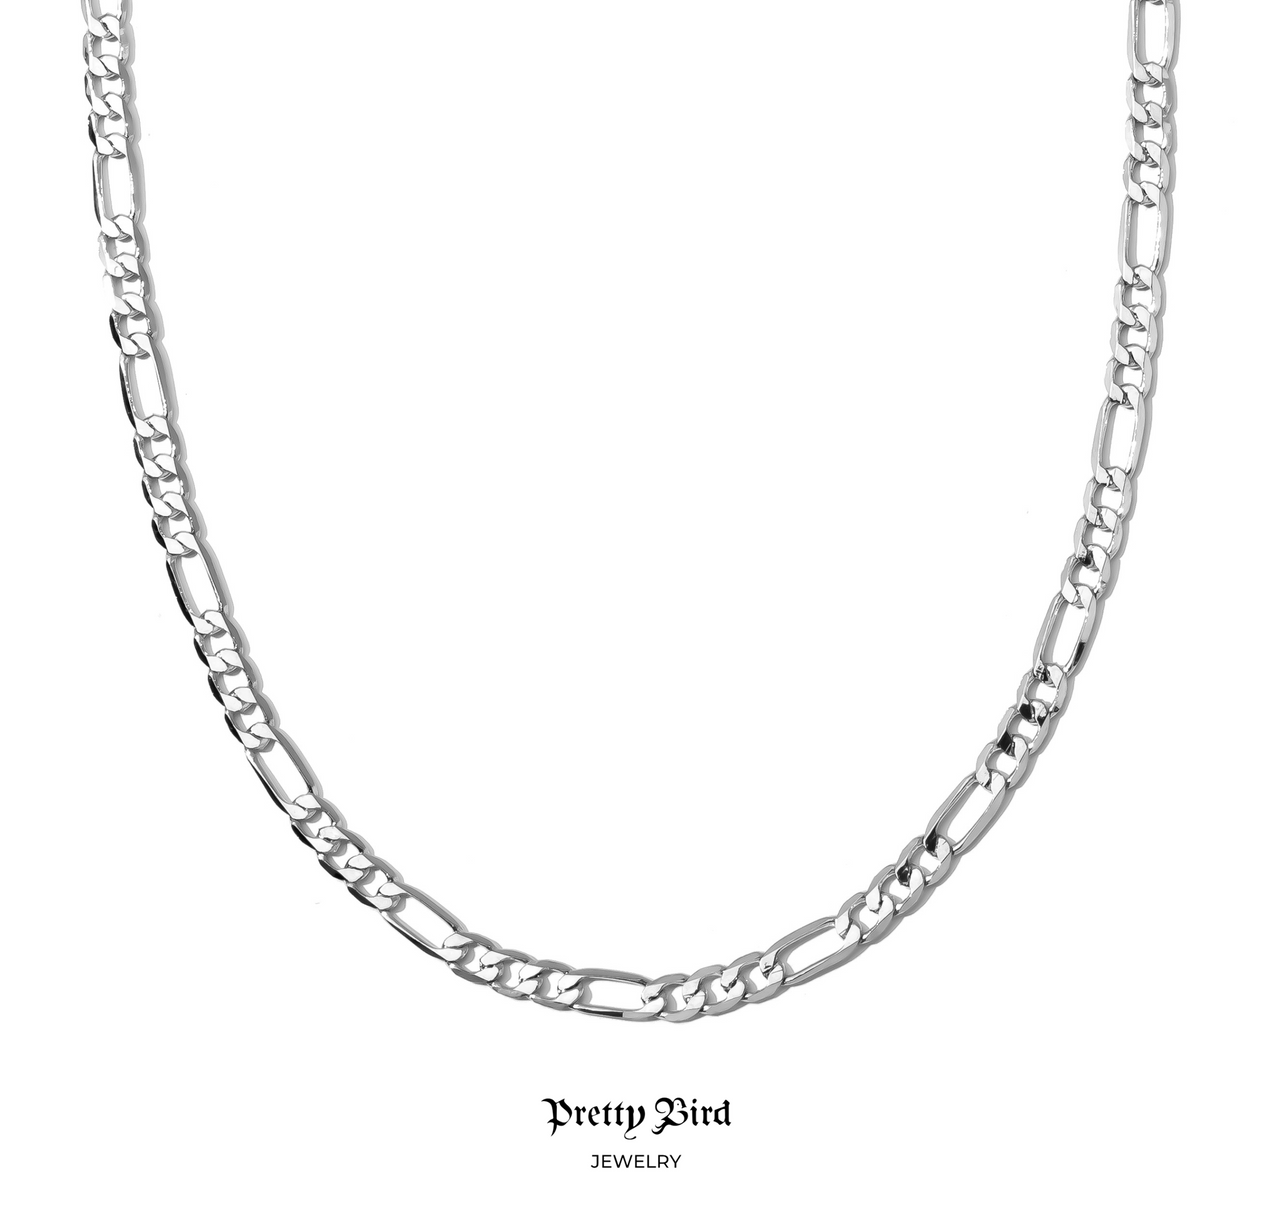 The White Figaro Chain Necklace